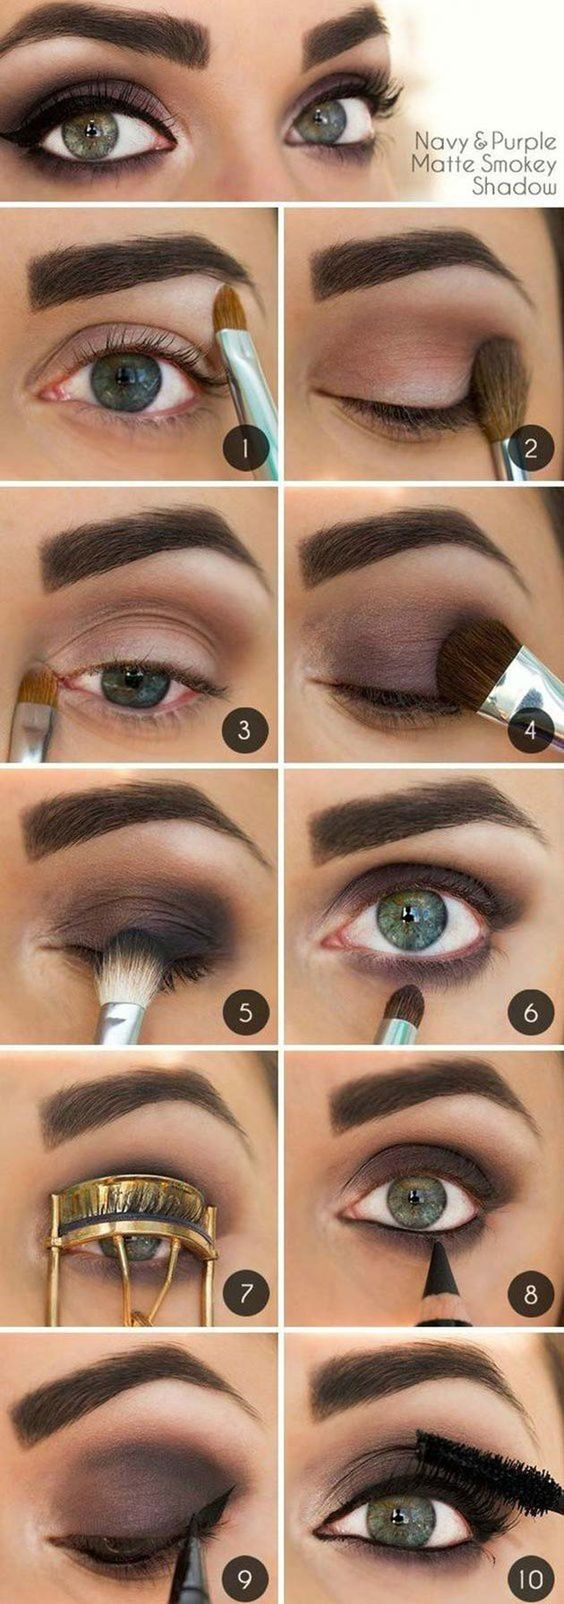 Navy Blue Eye Makeup 10 Step Step Makeup Tutorials For Green Eyes Her Style Code